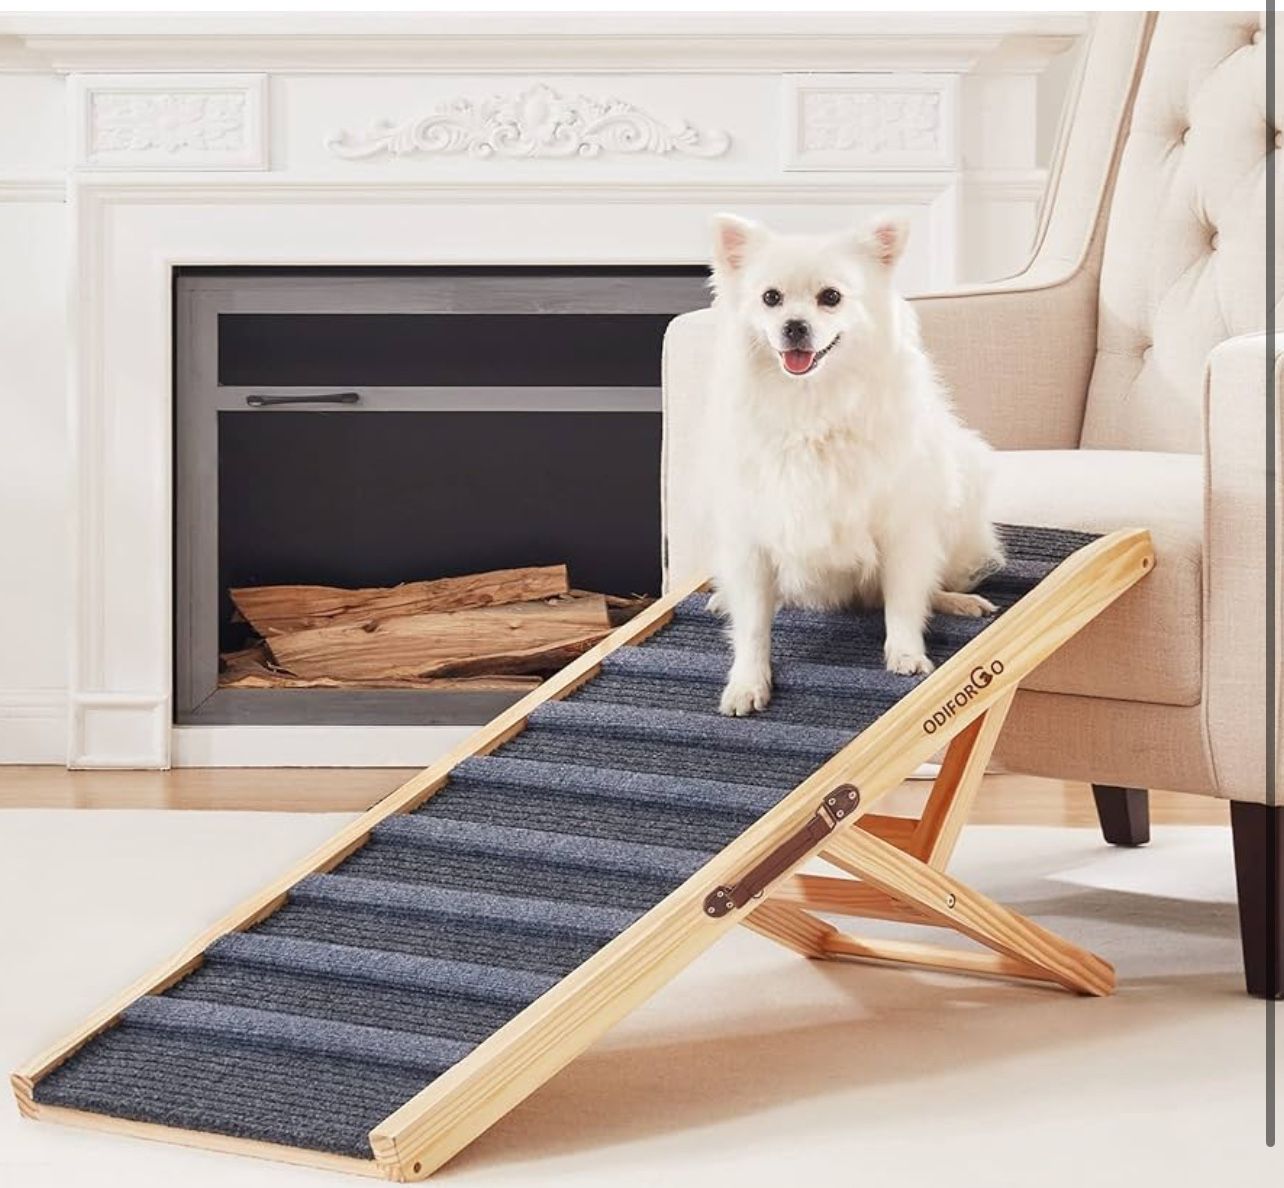 Dog Ramp for Bed, Adjustable Pet Ramp for Couch, Wooden Folding Portable Dog Cat Bed Ramp for Bed and Car, Non Slip Carpet Surface 5 Levels,Natural Wo